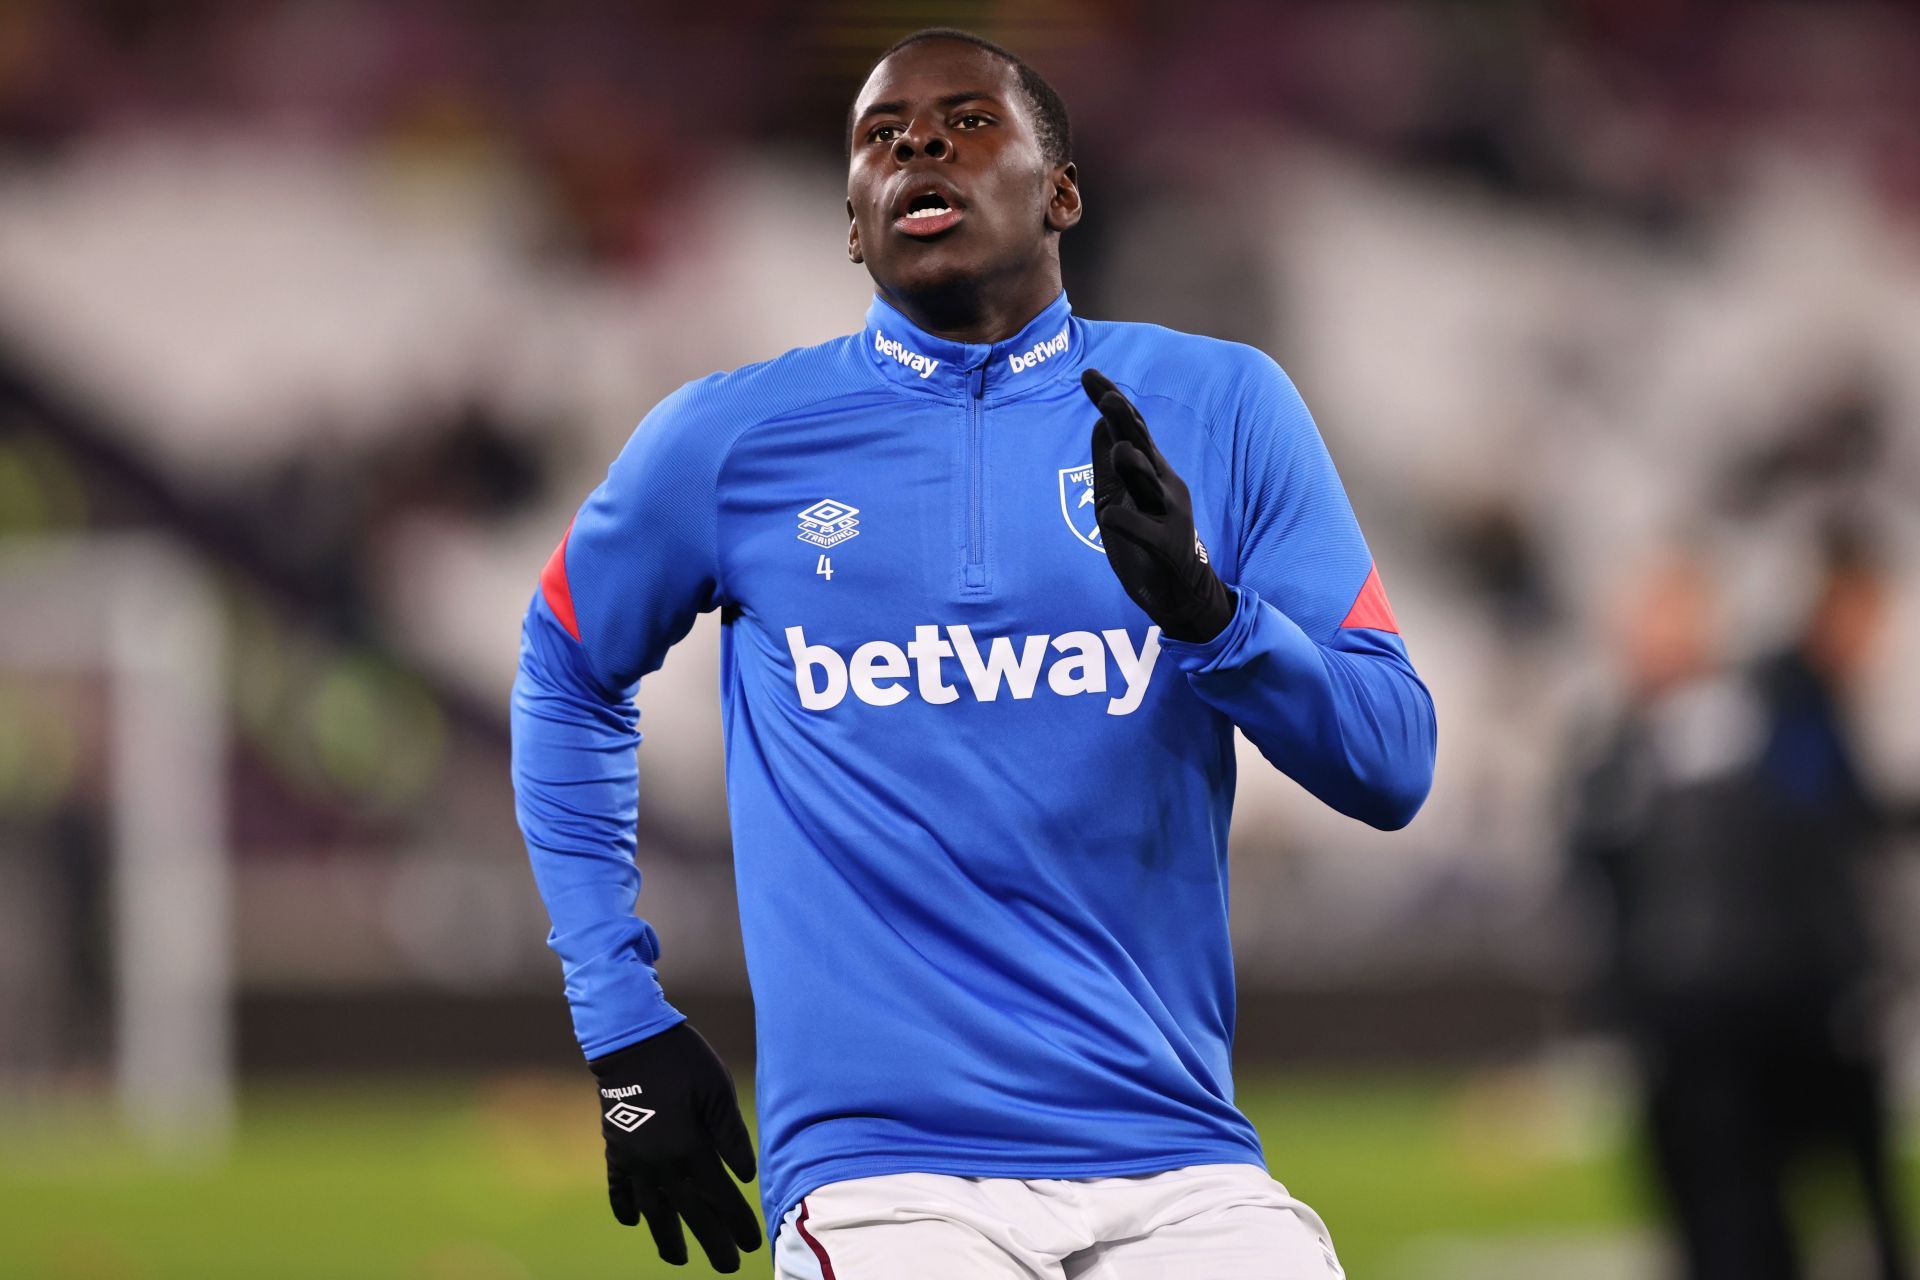 Zouma started against Watford Tuesday night despite the on-going investigation